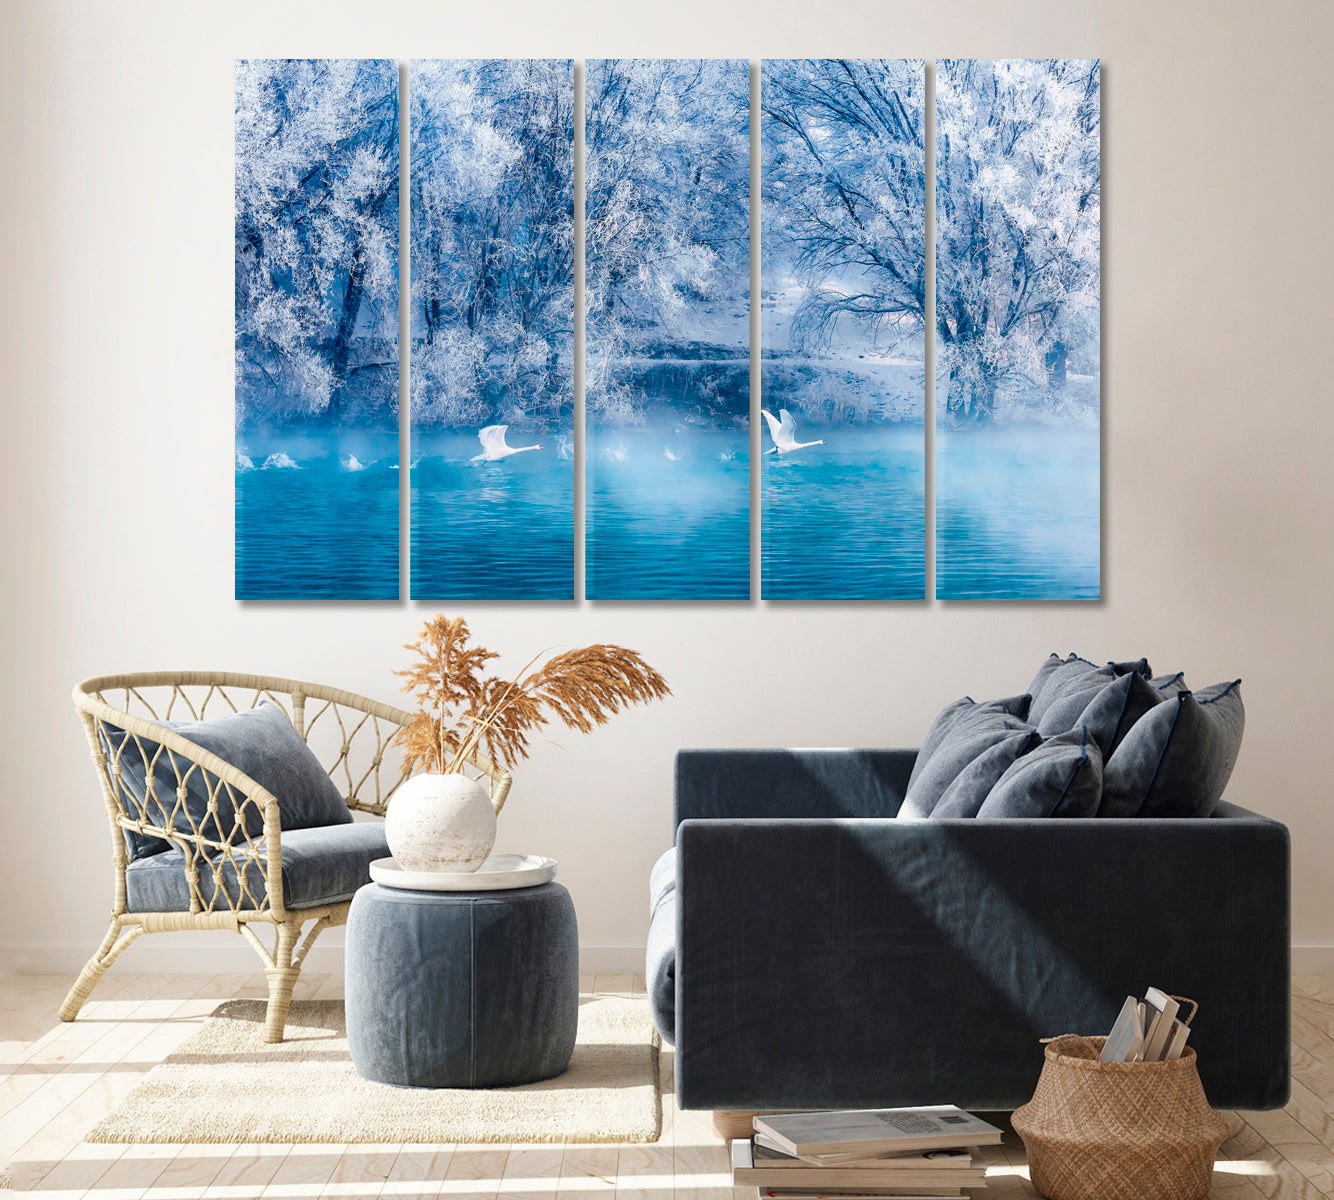 Beautiful Winter Landscape with Swans on Lake Canvas Print ArtLexy 5 Panels 36"x24" inches 